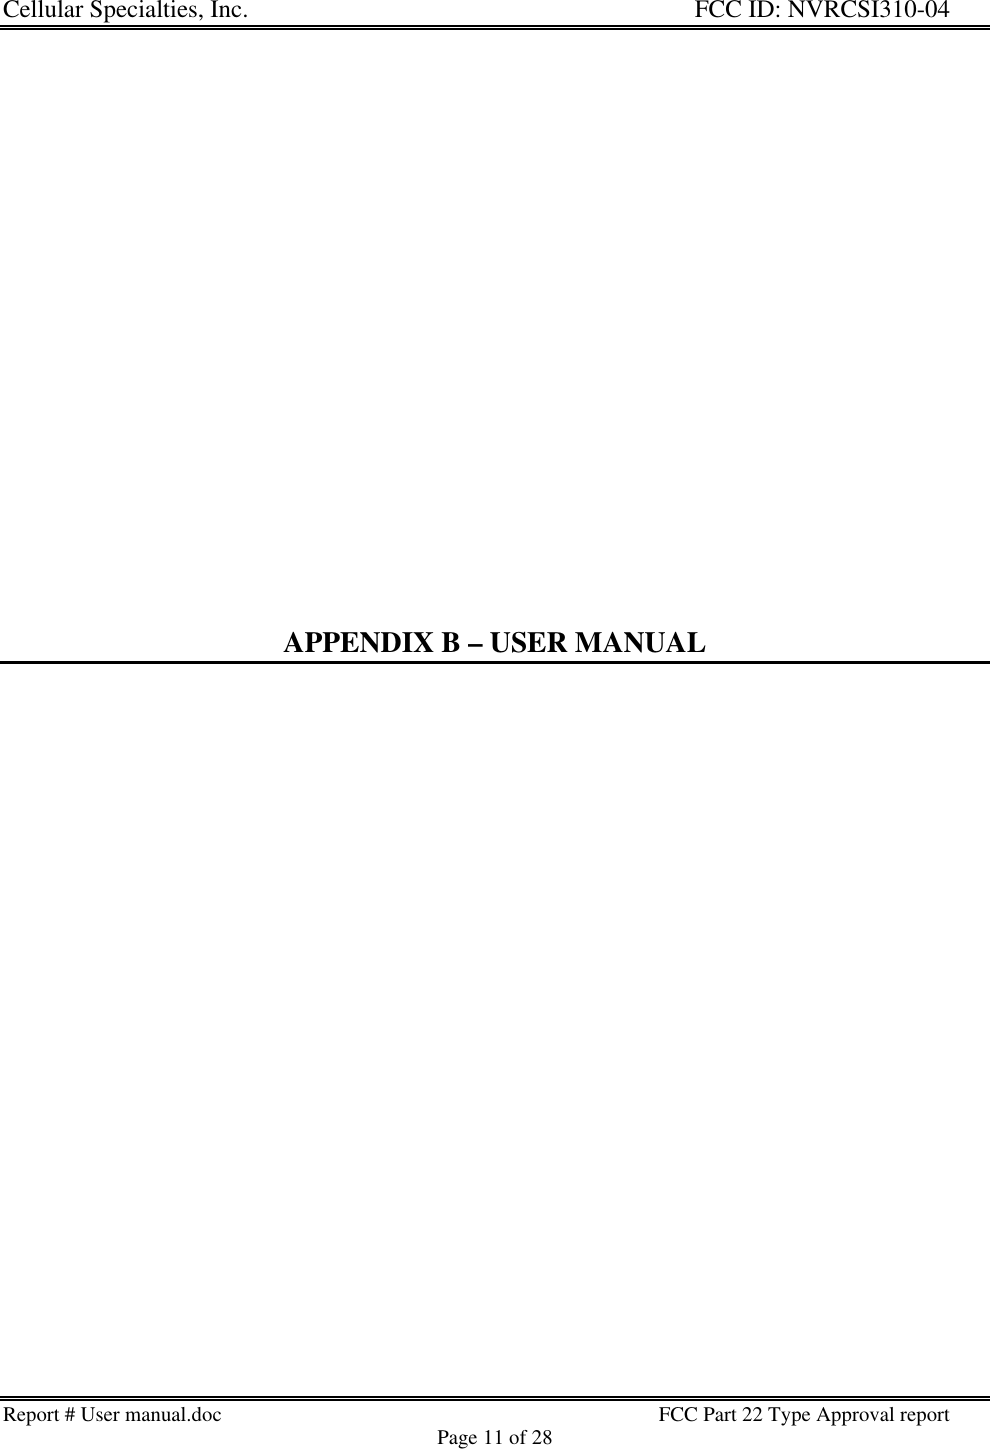 Cellular Specialties, Inc. FCC ID: NVRCSI310-04Report # User manual.doc FCC Part 22 Type Approval reportPage 11 of 28APPENDIX B – USER MANUAL